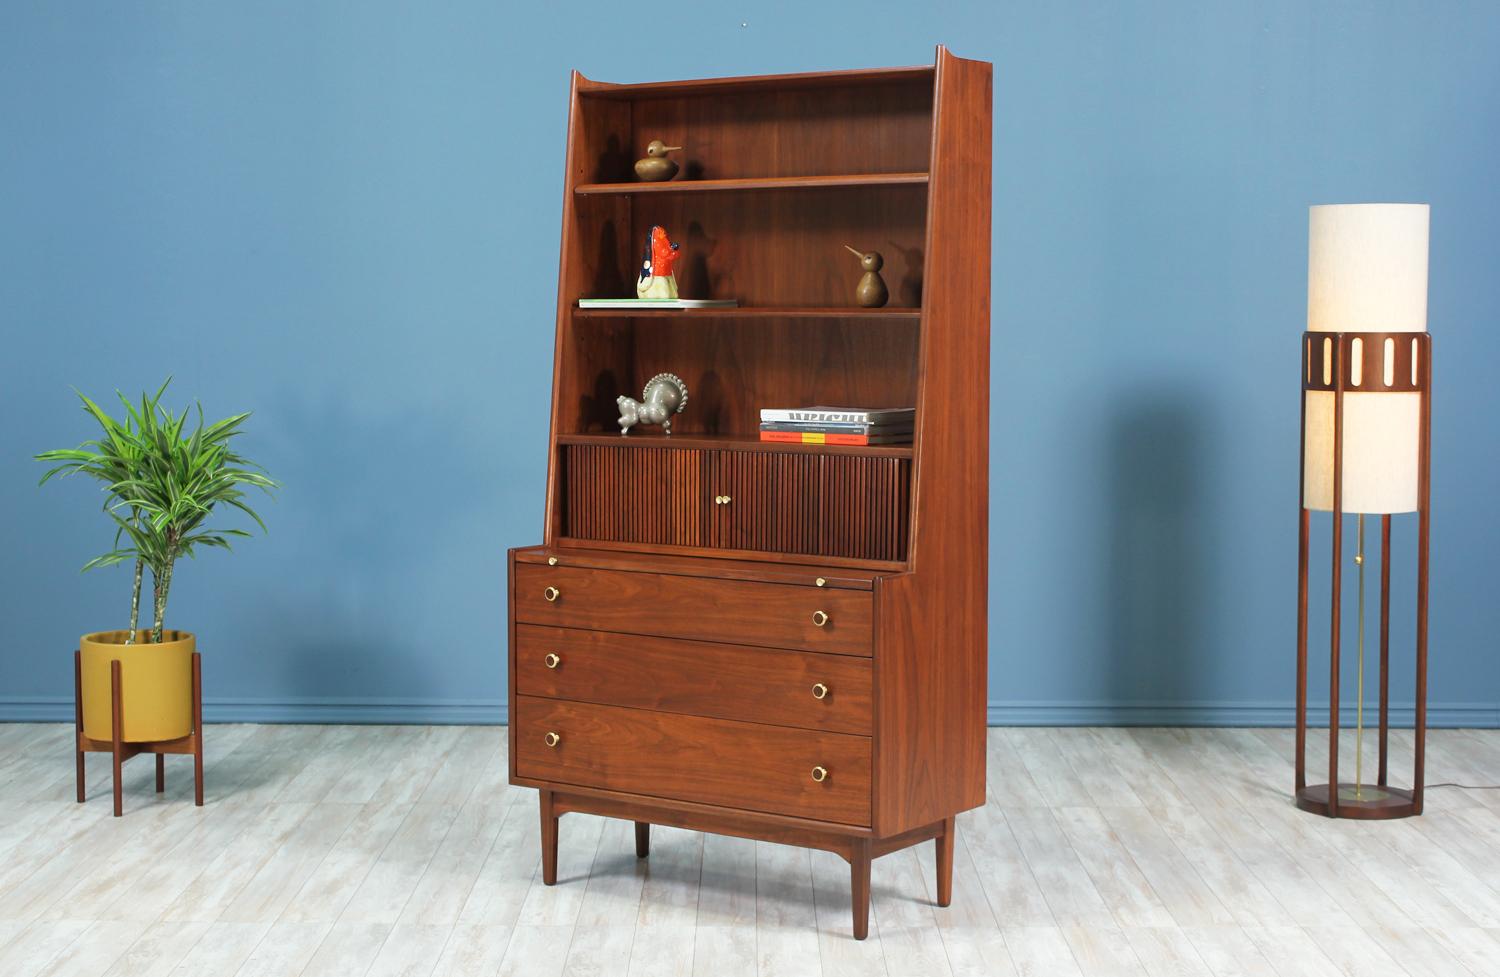 Tall Bookshelf with desk designed by Kipp Stewart & Stewart MacDougall for Drexel’s iconic Declaration collection and manufactured in the United States circa 1960’s. This multifunctional piece features a beautiful and rich walnut wood frame with